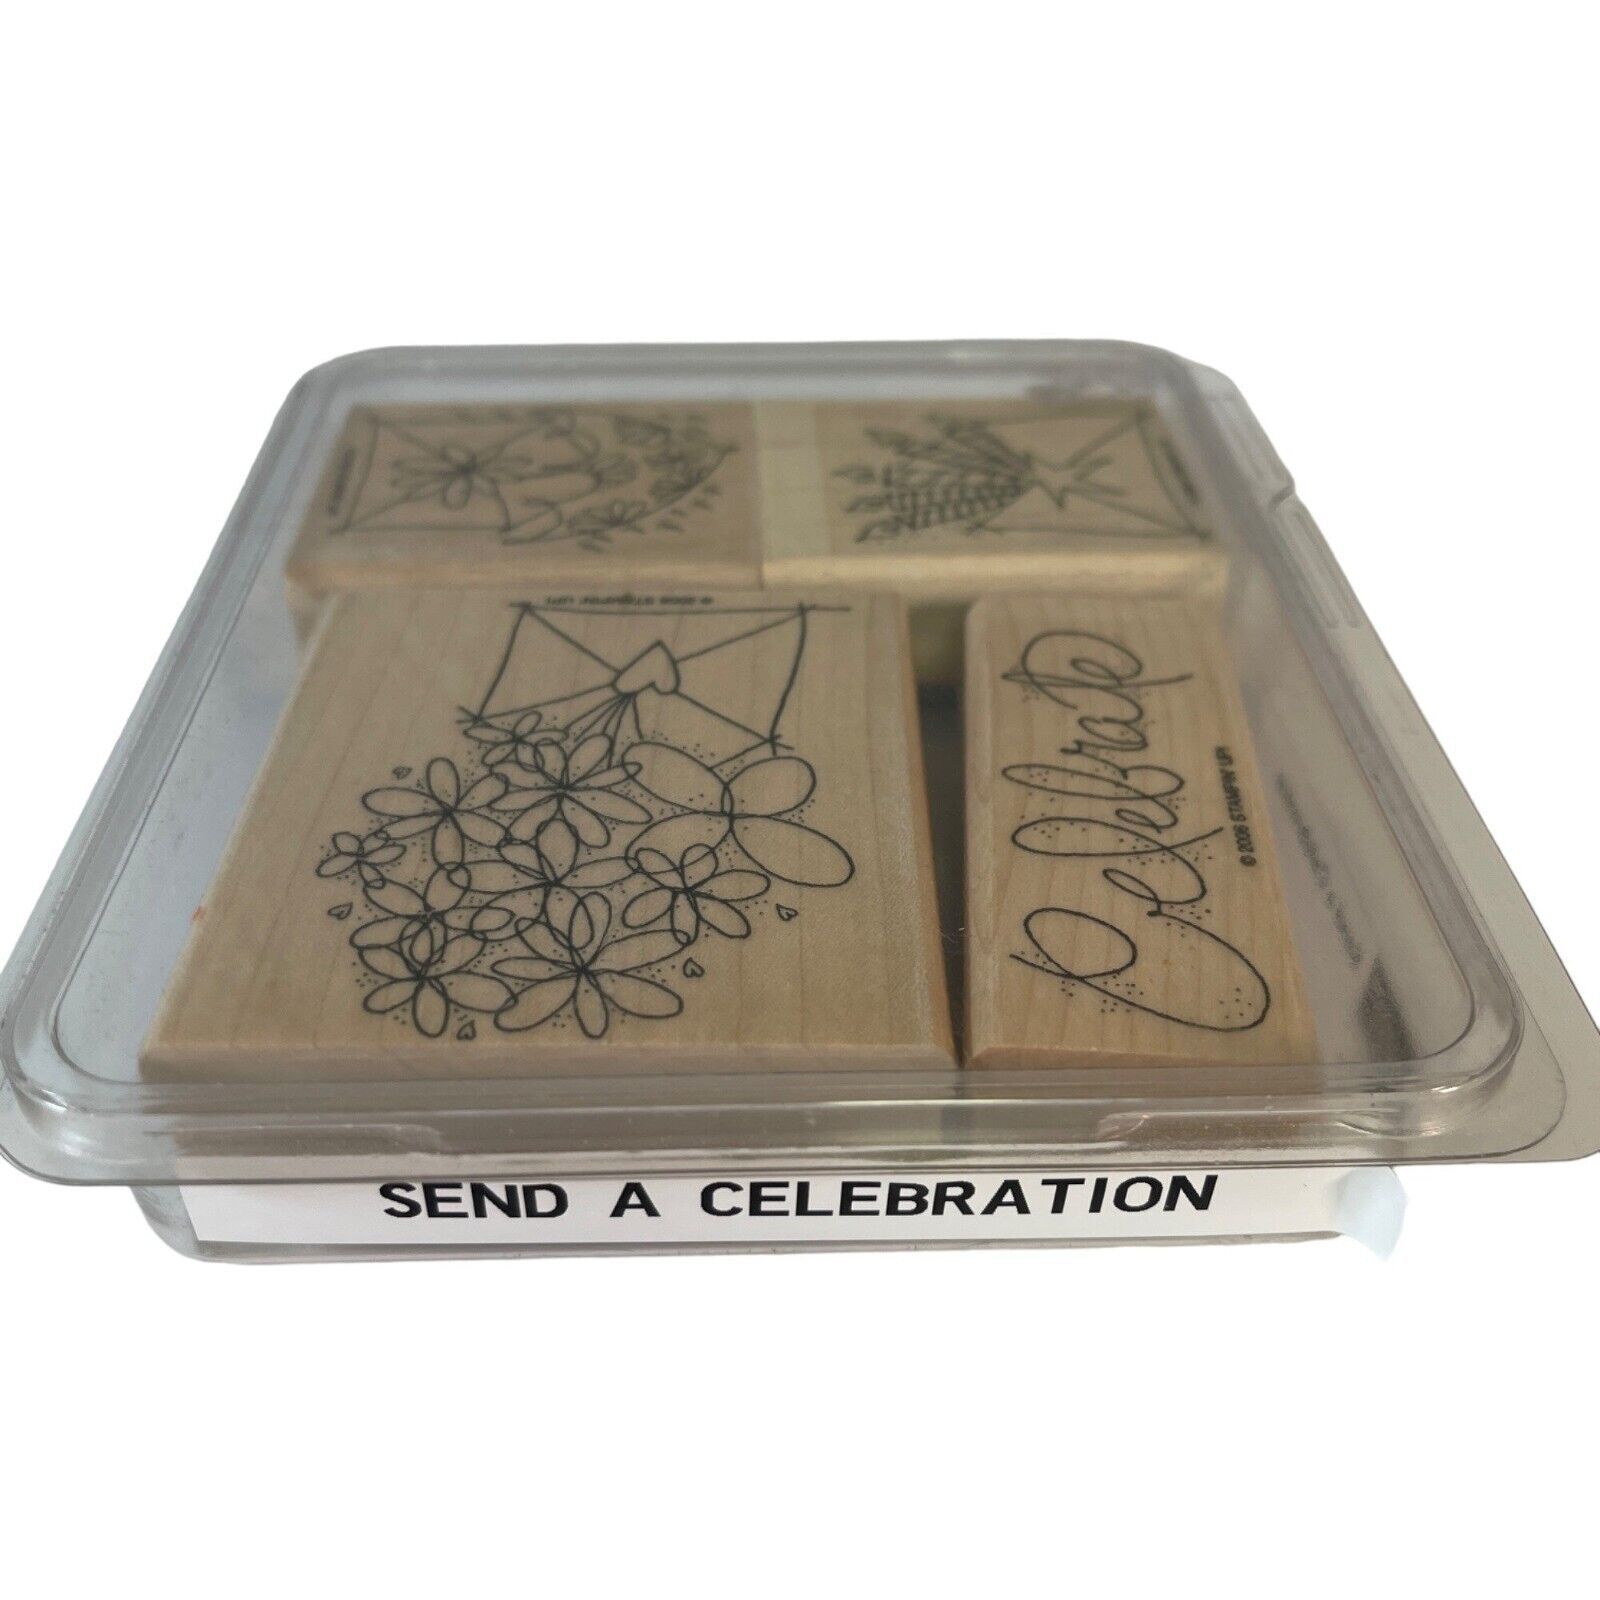 Primary image for Stampin Up Send a Celebration Rubber Stamp Set Wood Mounted